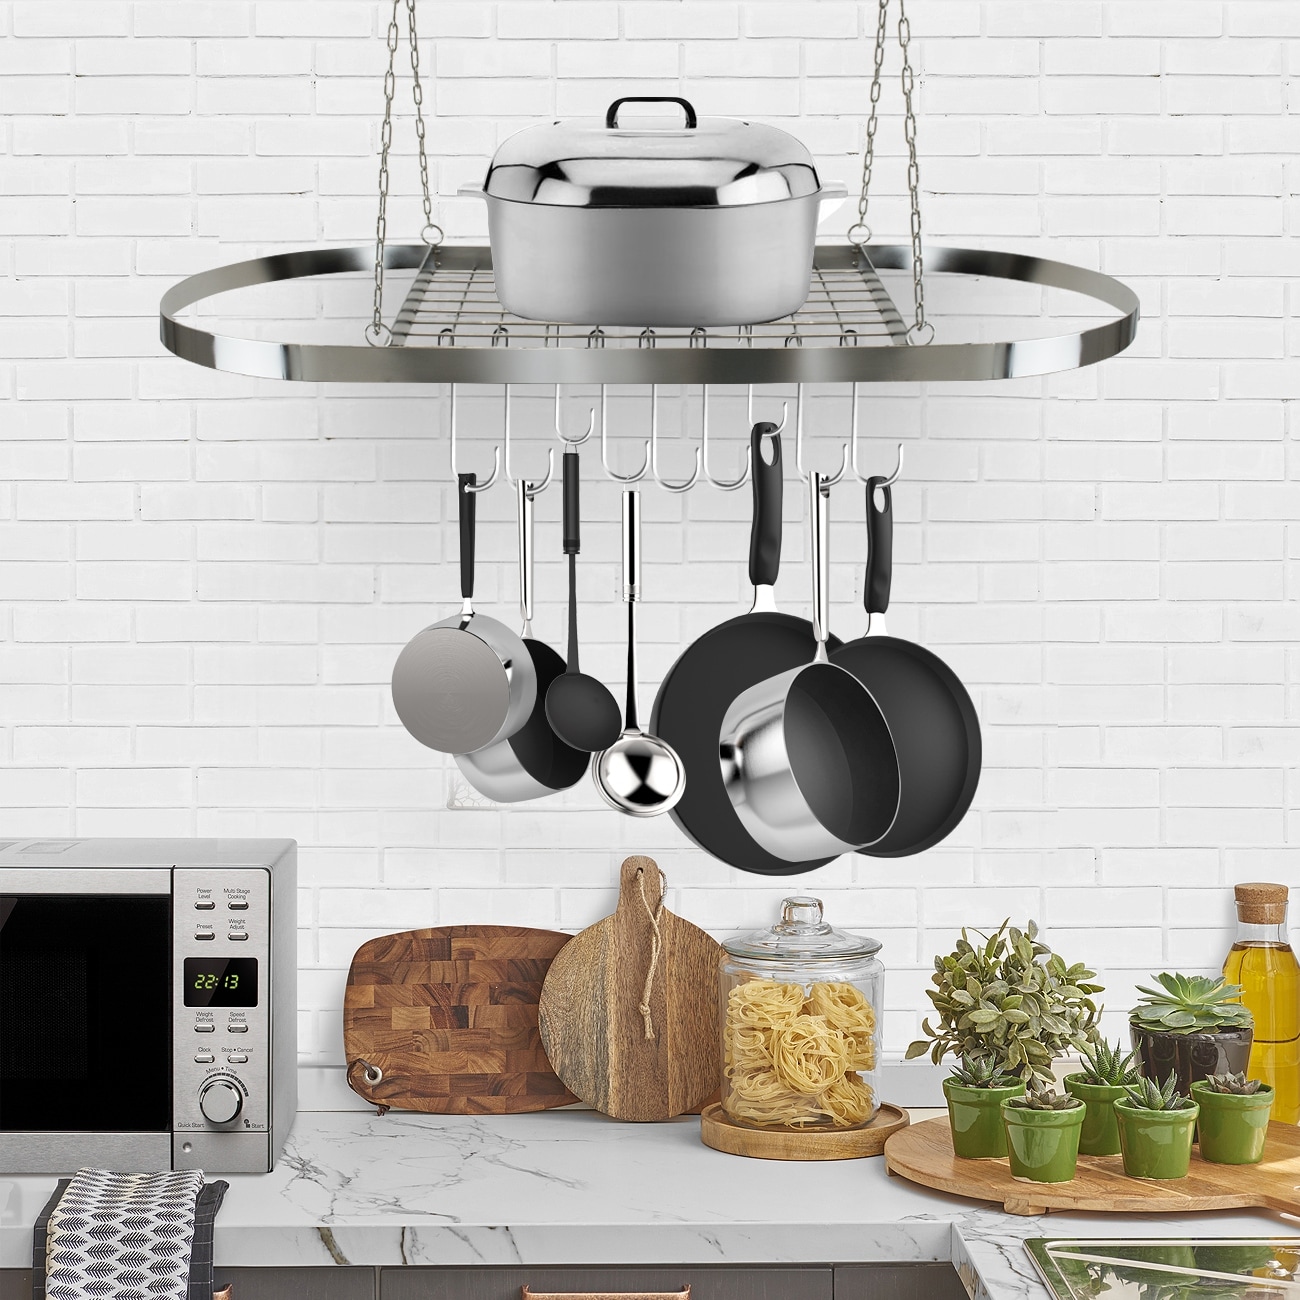 Ceiling mounted Pot Rack with Hooks - Chrome - On Sale - Bed Bath & Beyond  - 22831196